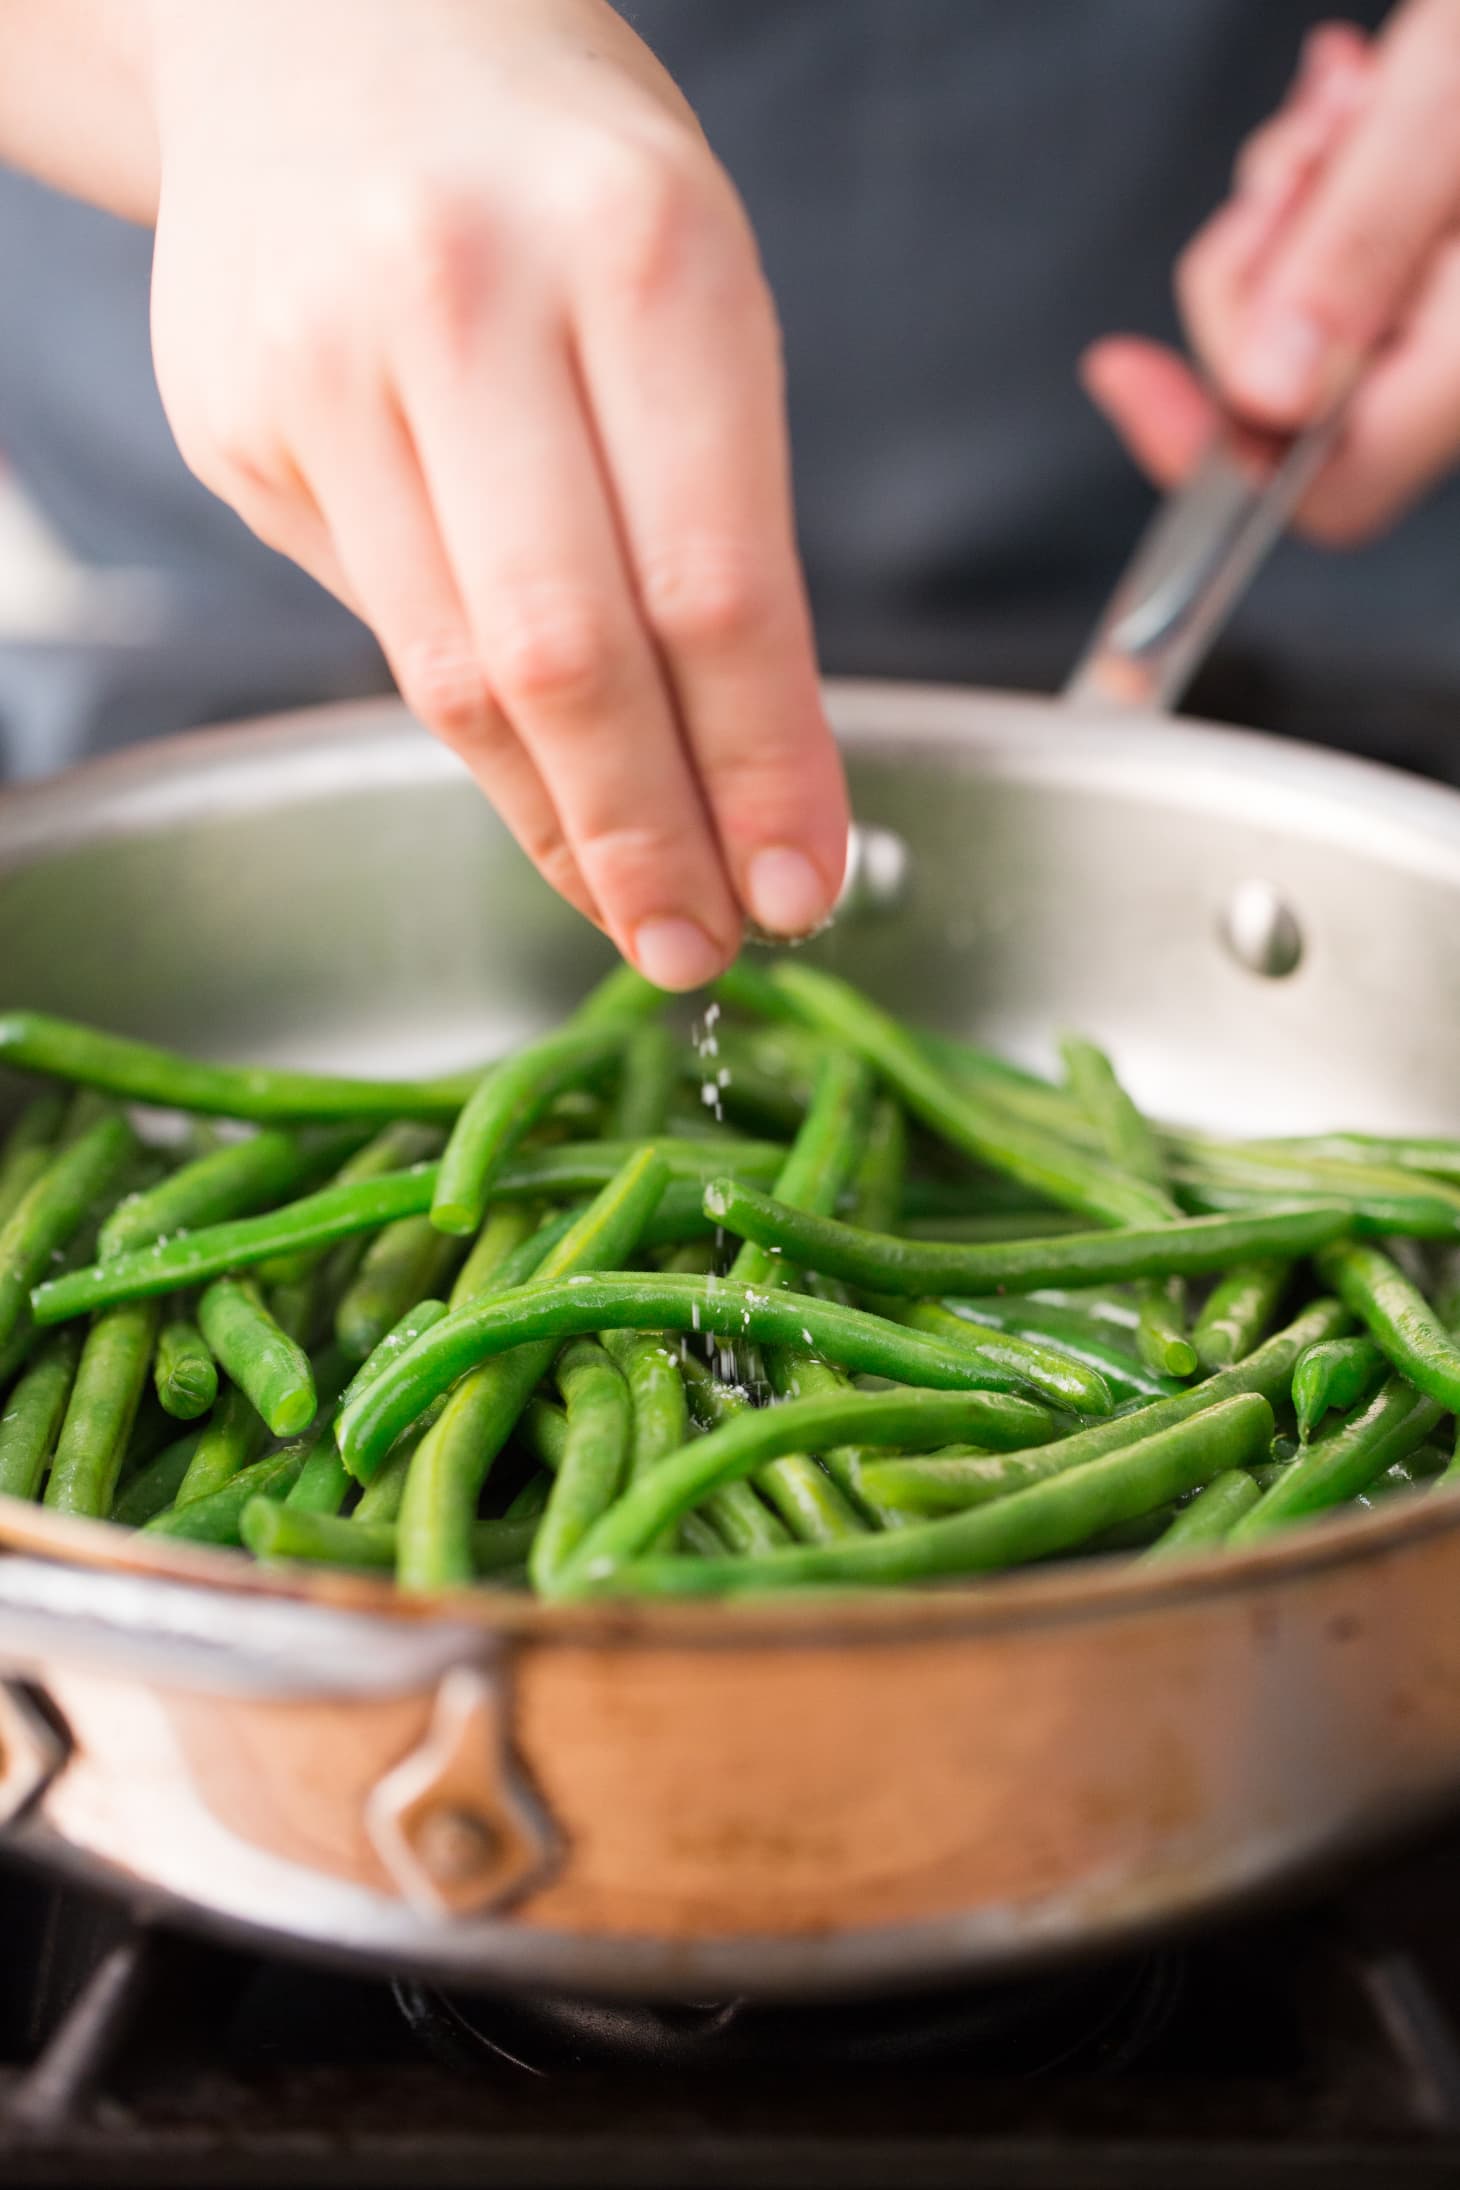 How To Cook Green Beans - Stovetop | Kitchn